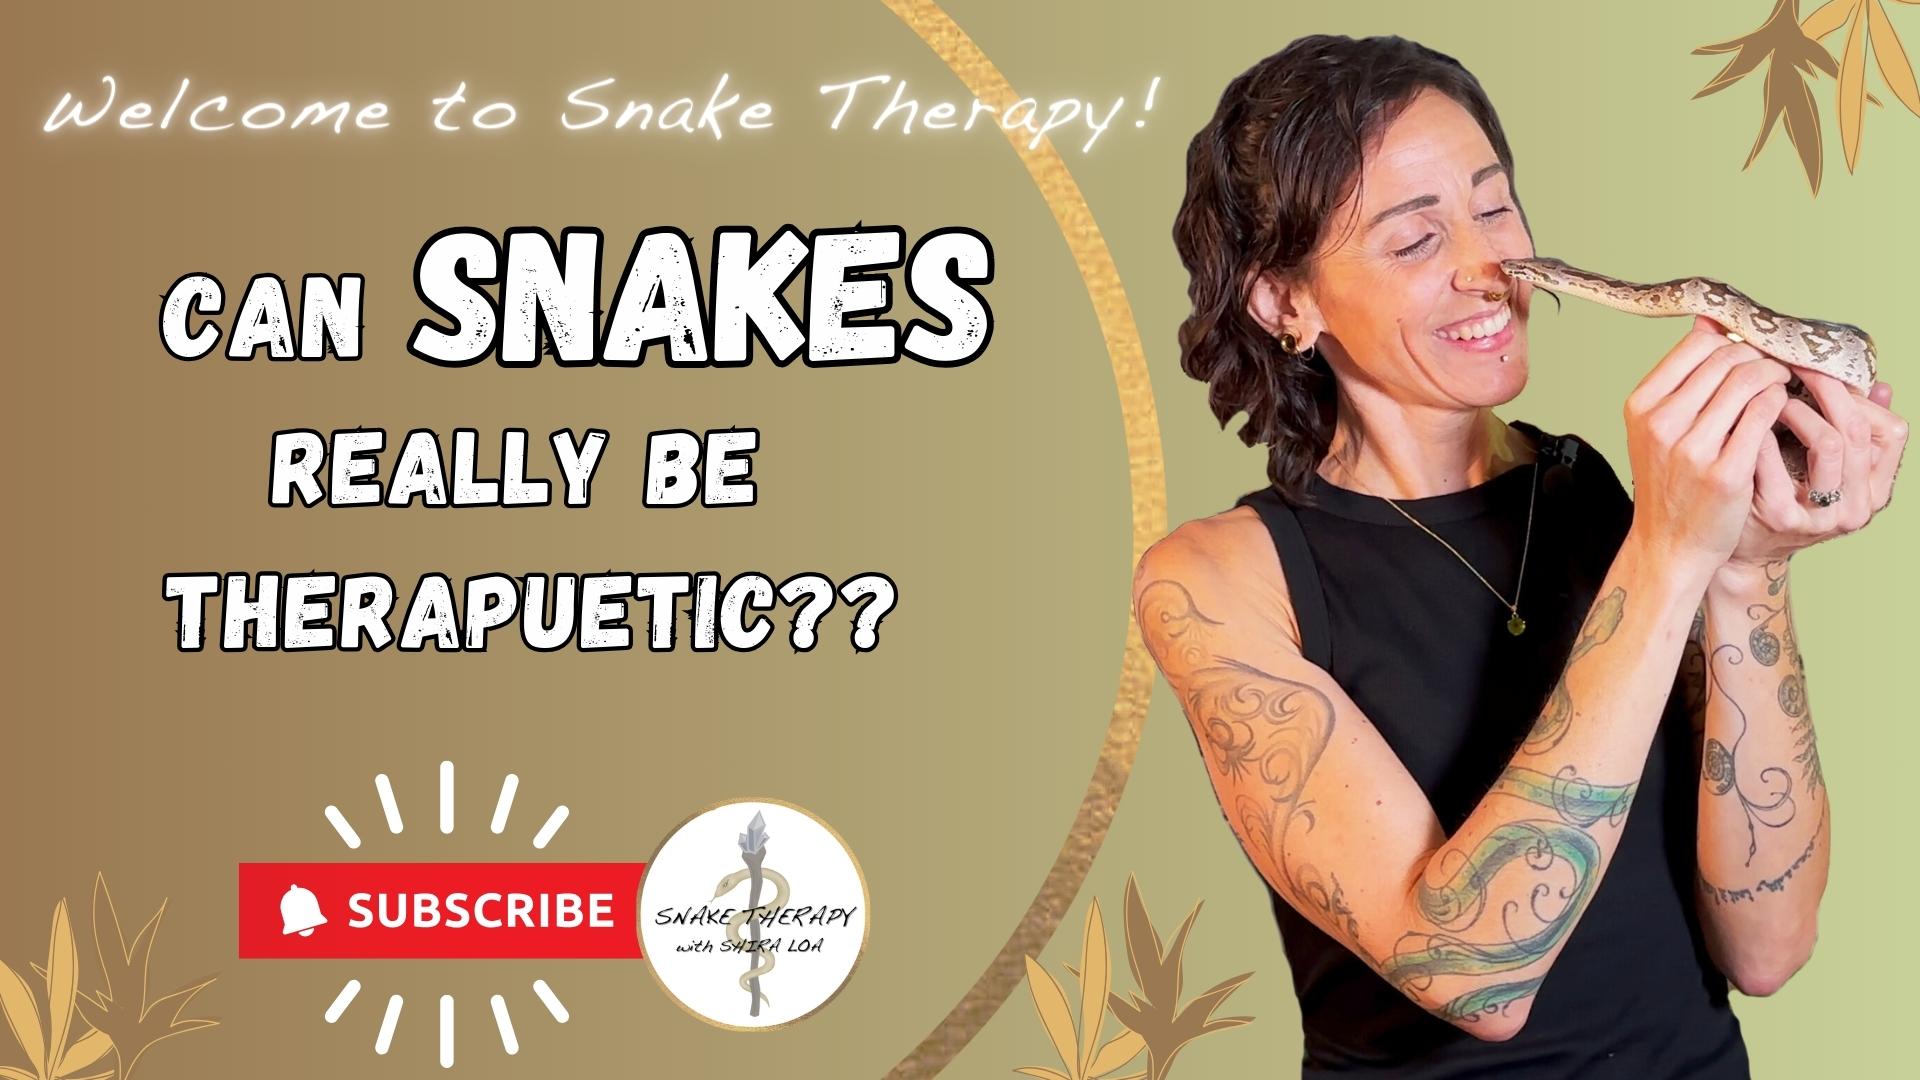 Load video: Snake Therapy with Shira Loa on Youtube